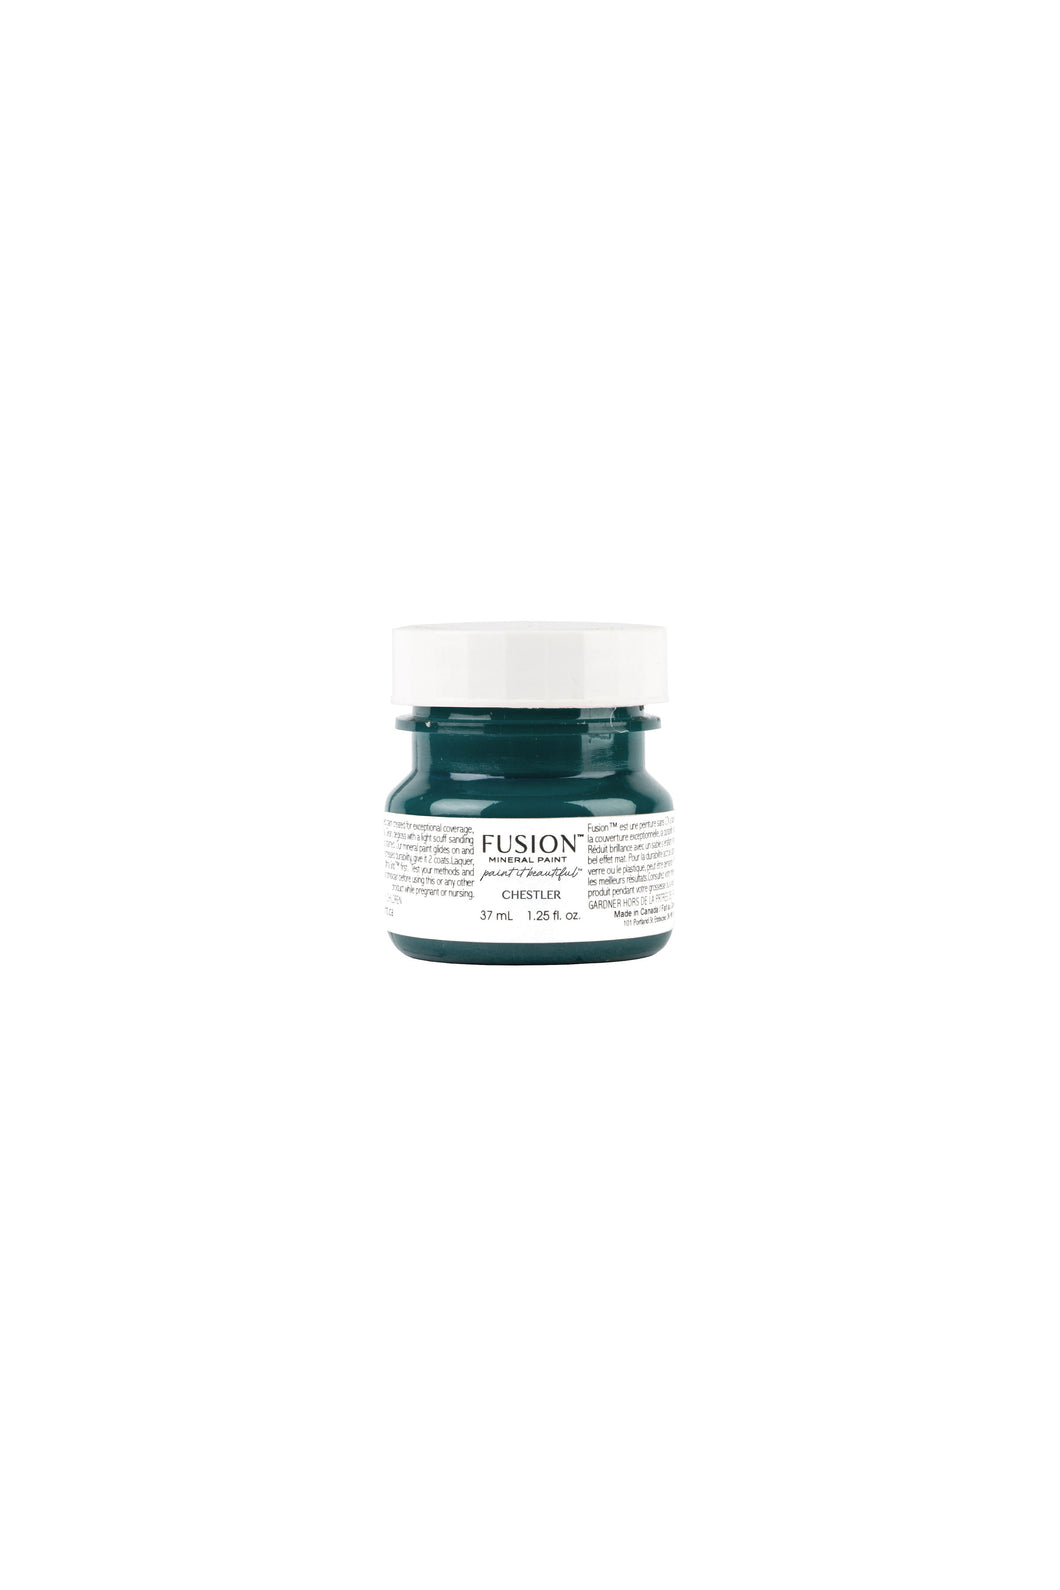 Fusion Mineral Paint - Chestler 37 ml Jar